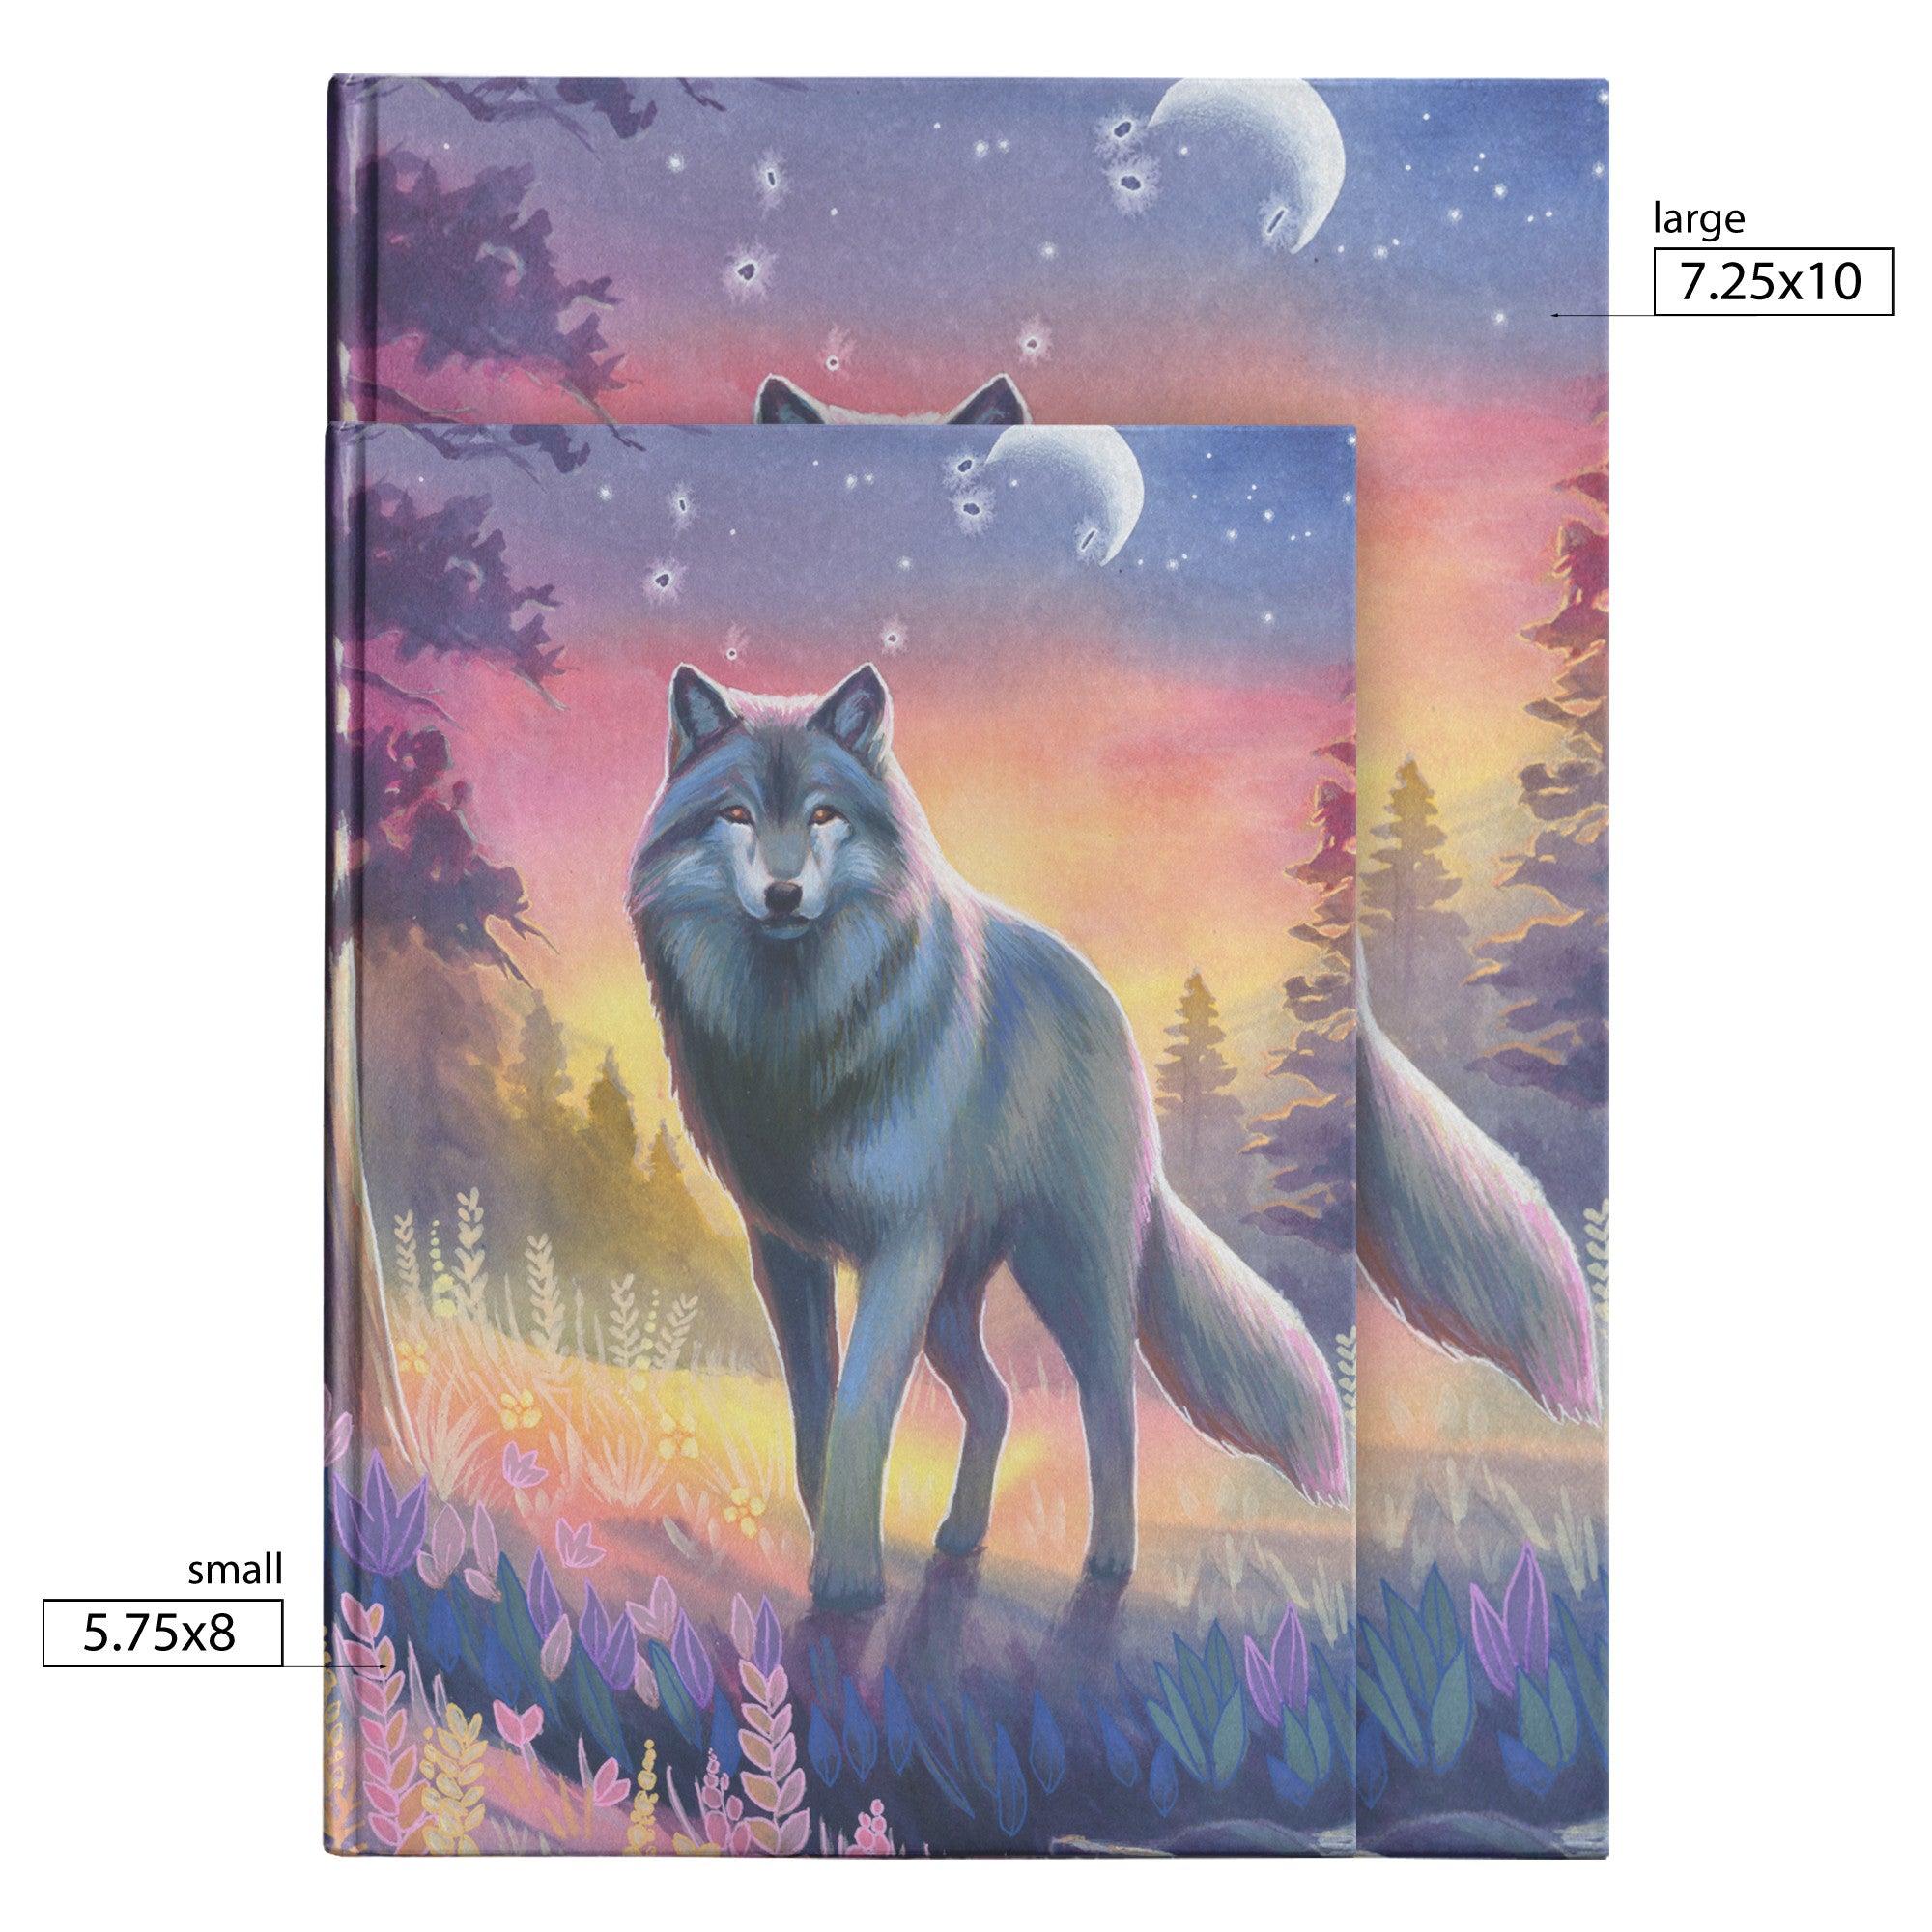 Wolf Journal featuring a mystical wolf in a forest under a starry sky with crescent moons, available in two sizes.